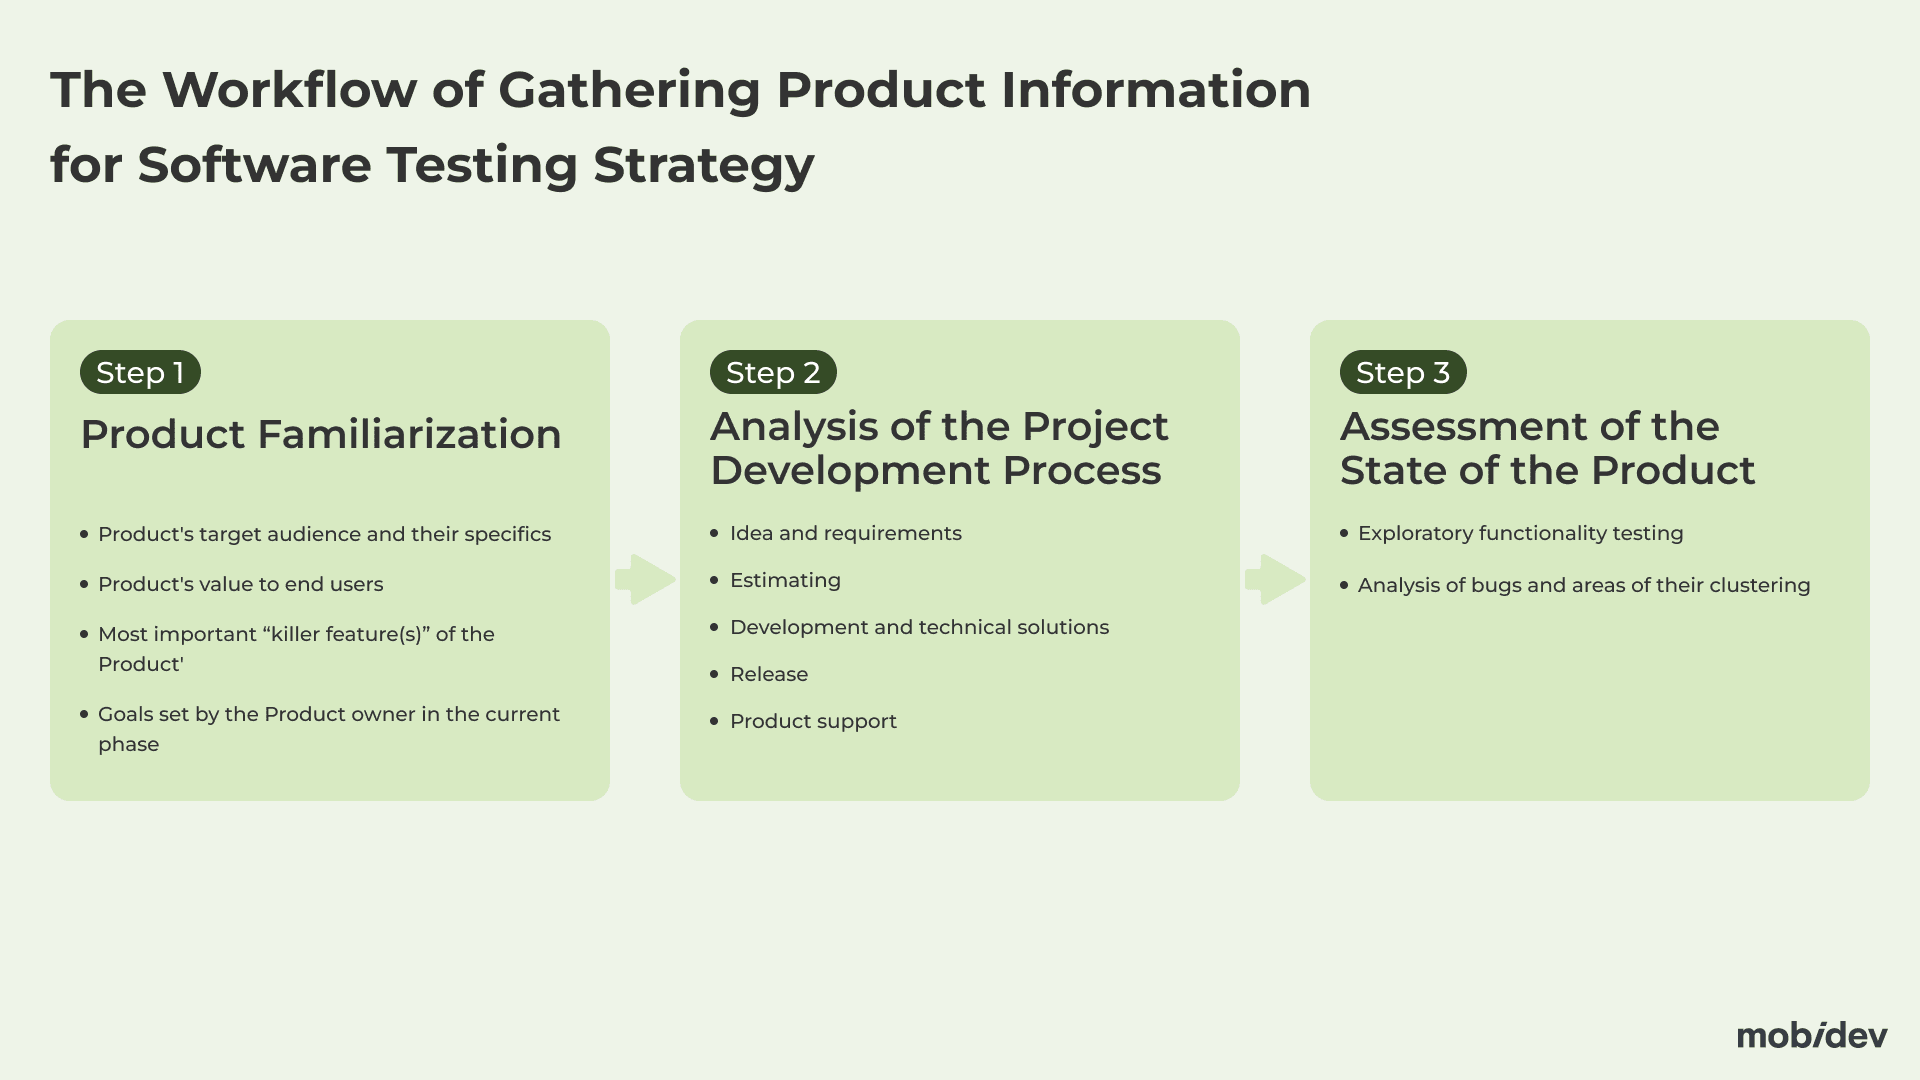 Workflow of Gathering Product Information